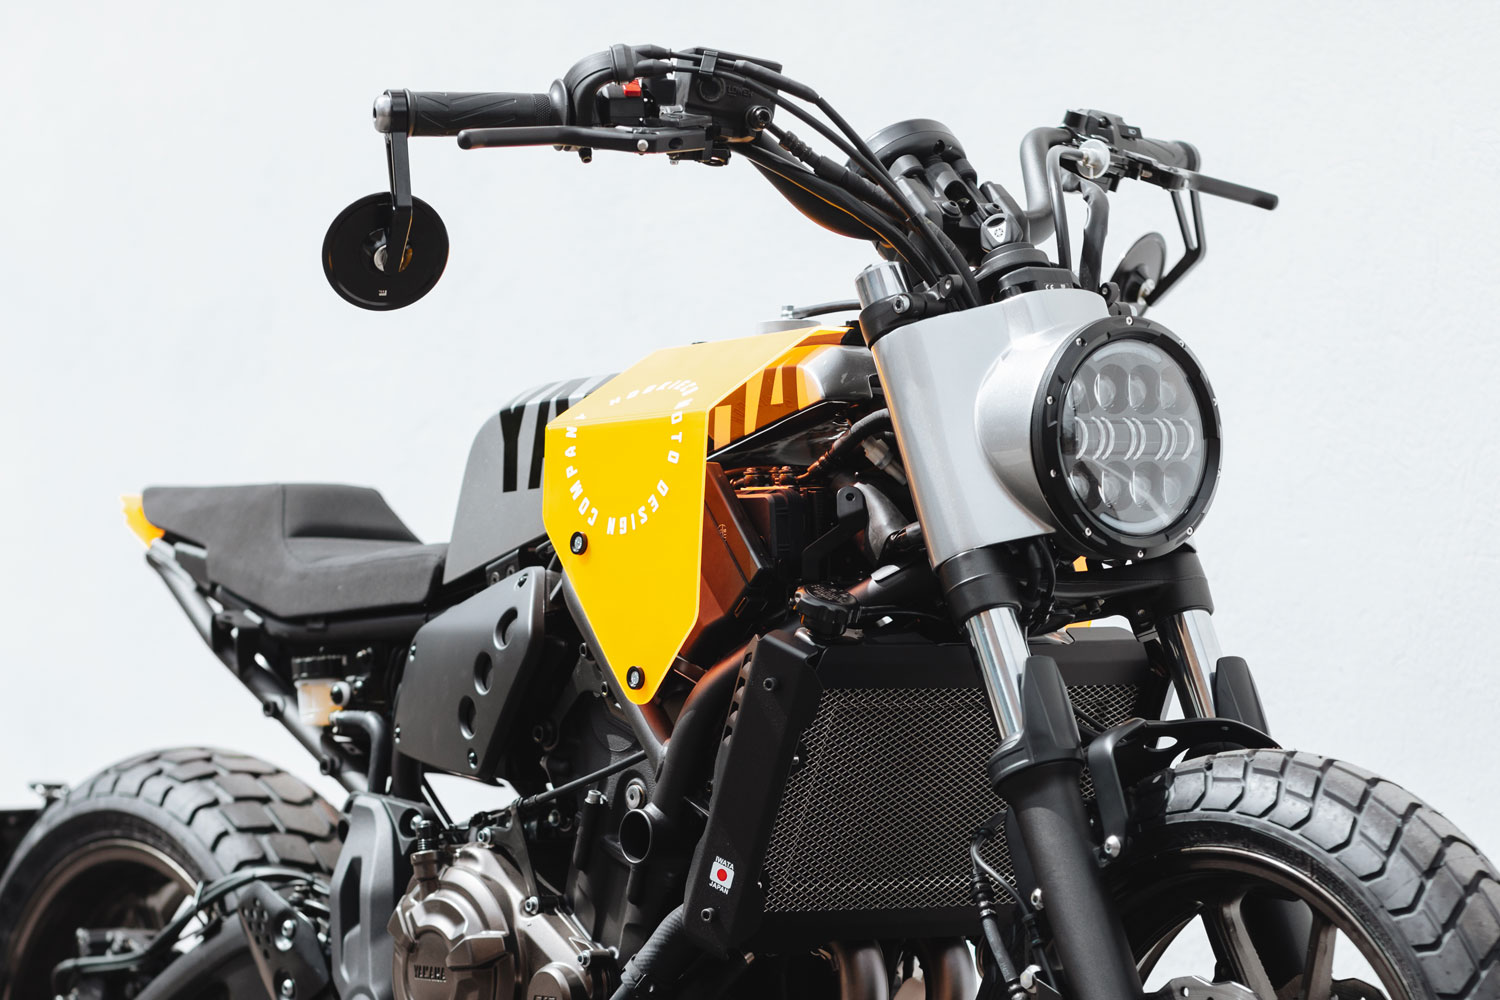 Yamaha Looks to the Experts to Customize the XSR700